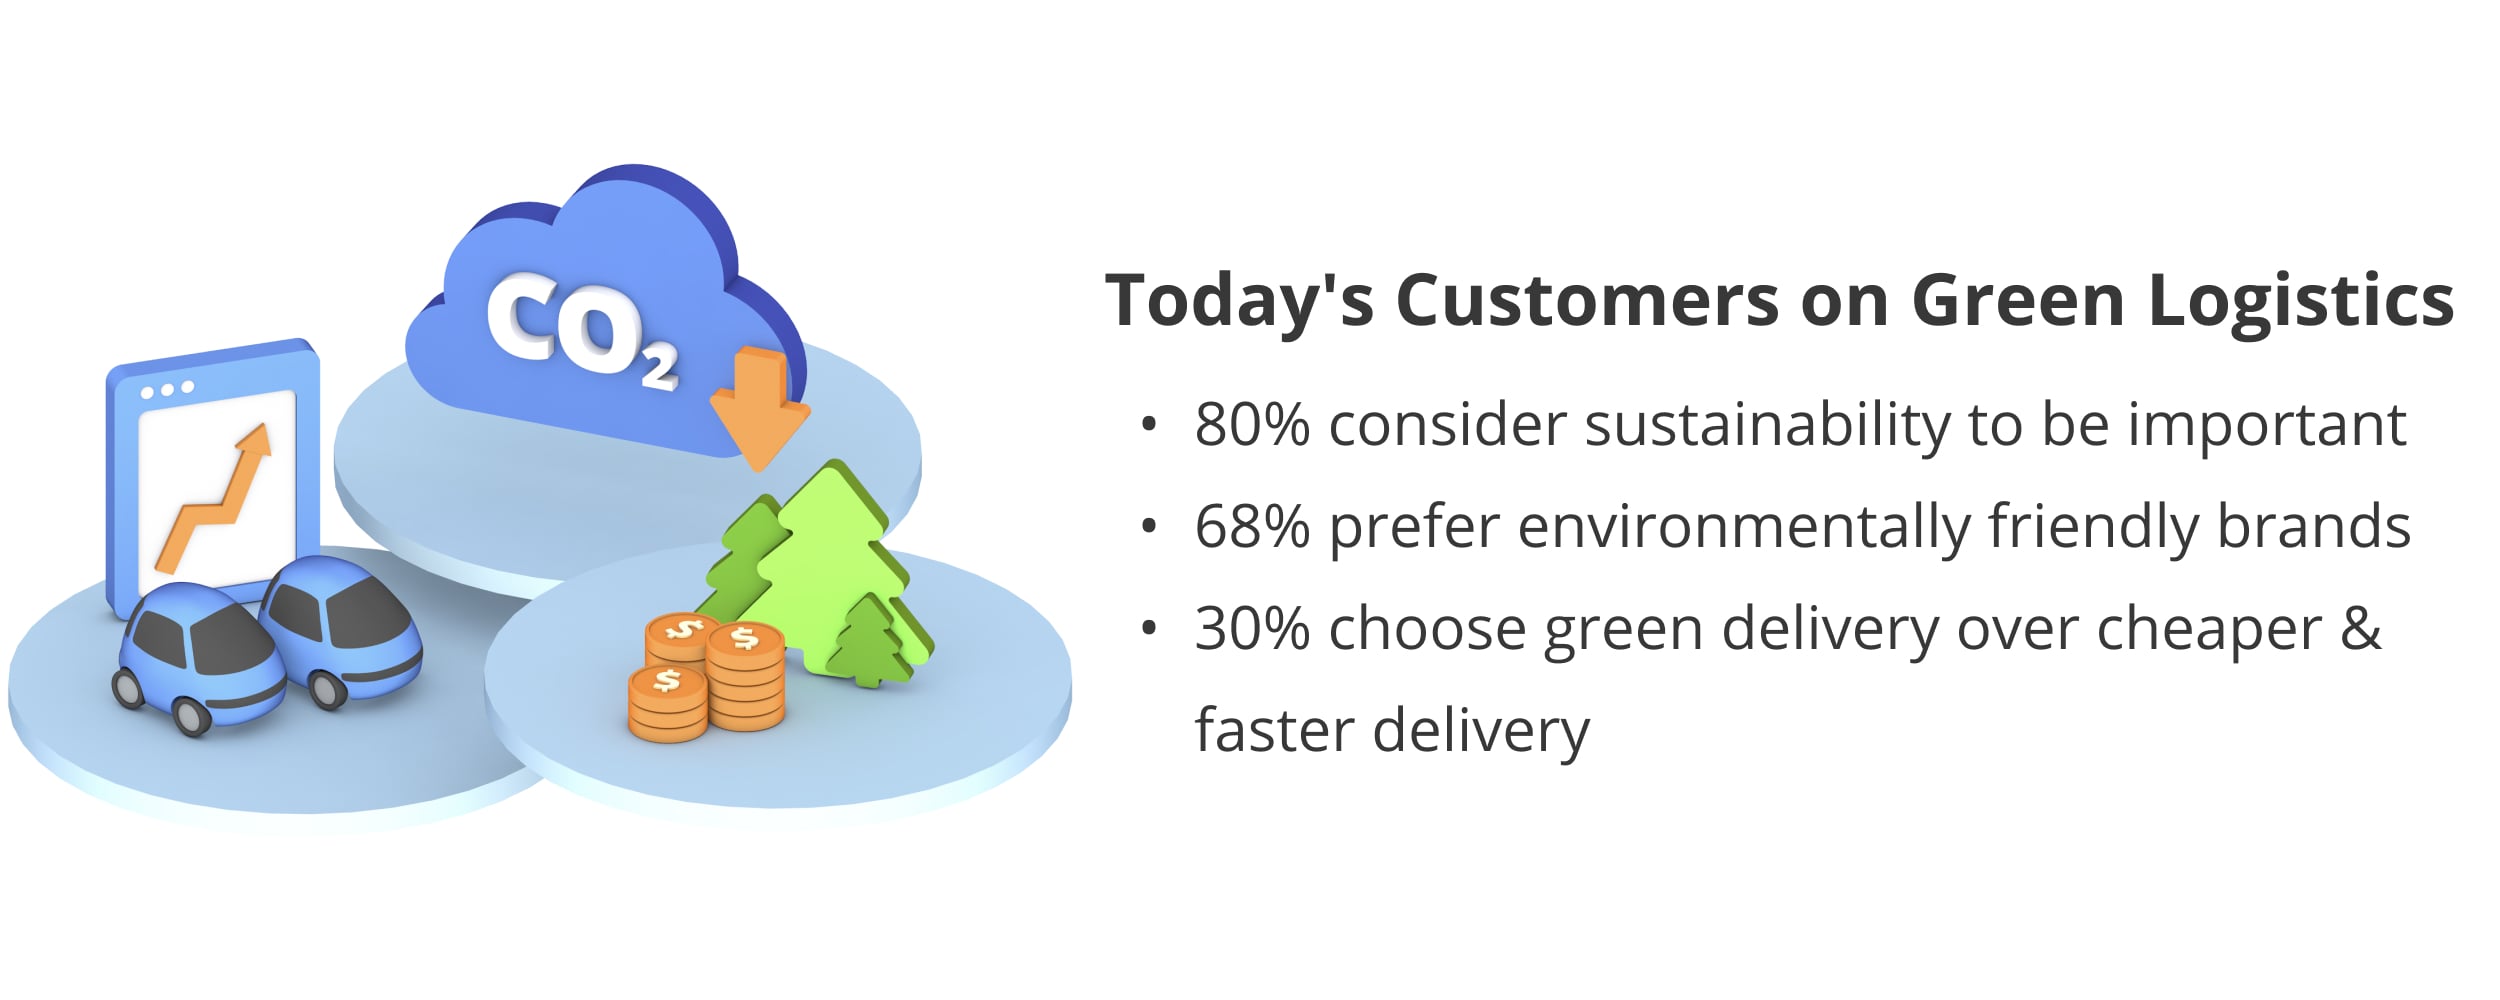 Statistics on how green logistics and sustainable delivery influence consumers' purchasing decisions.